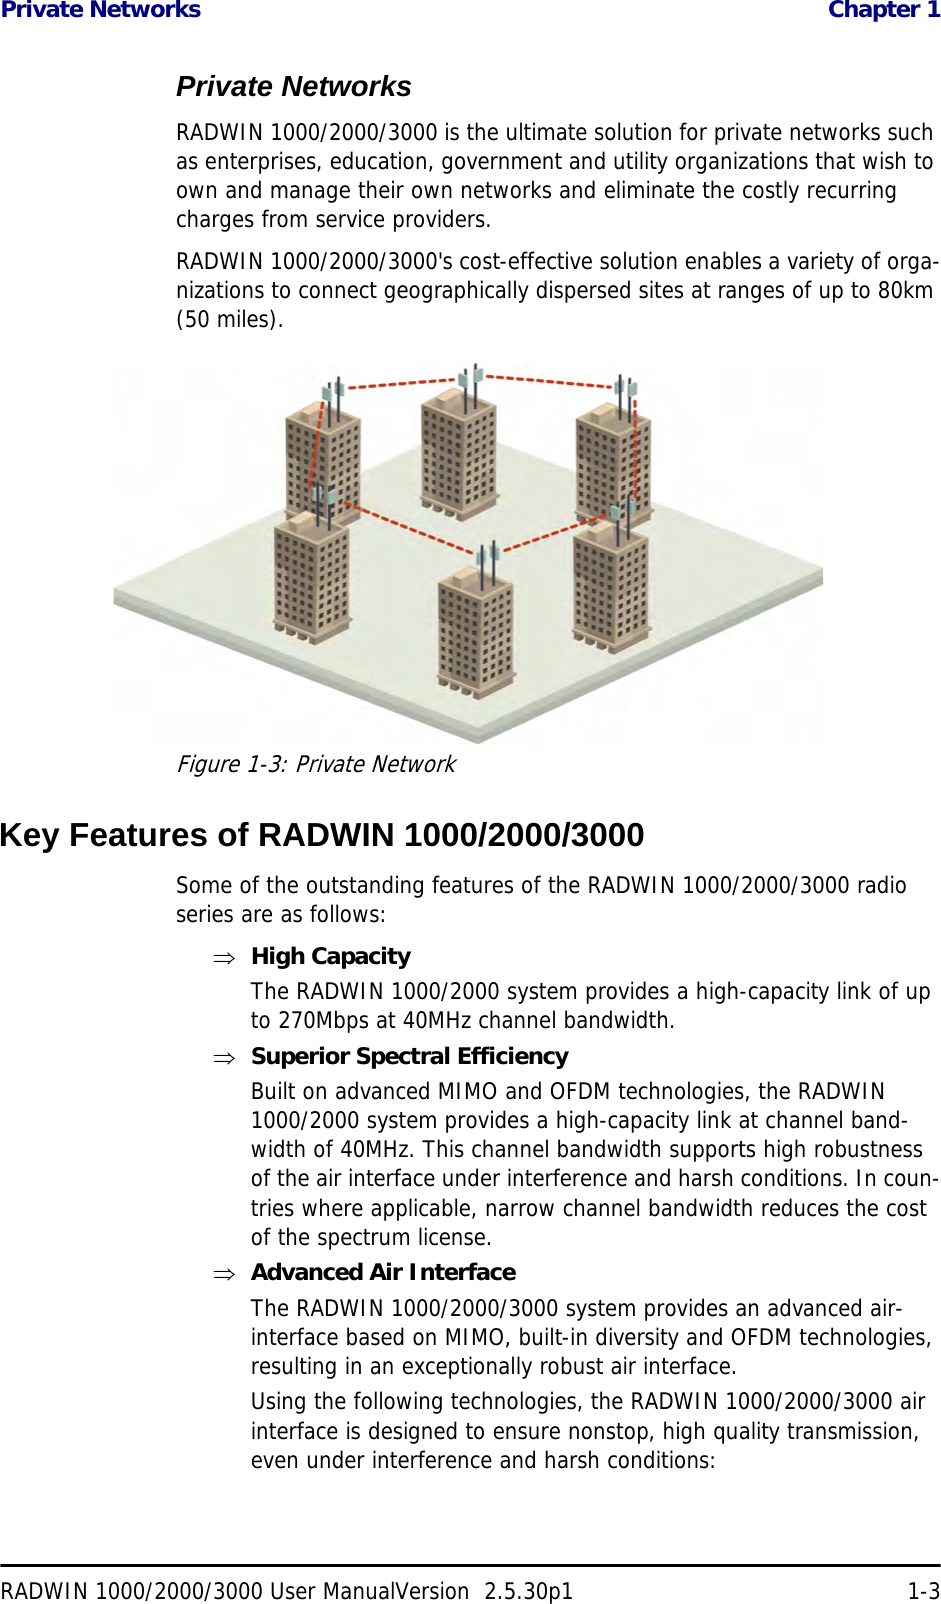 Private Networks  Chapter 1RADWIN 1000/2000/3000 User ManualVersion  2.5.30p1 1-3Private NetworksRADWIN 1000/2000/3000 is the ultimate solution for private networks such as enterprises, education, government and utility organizations that wish to own and manage their own networks and eliminate the costly recurring charges from service providers.RADWIN 1000/2000/3000&apos;s cost-effective solution enables a variety of orga-nizations to connect geographically dispersed sites at ranges of up to 80km (50 miles).Figure 1-3: Private NetworkKey Features of RADWIN 1000/2000/3000Some of the outstanding features of the RADWIN 1000/2000/3000 radio series are as follows:⇒High CapacityThe RADWIN 1000/2000 system provides a high-capacity link of up to 270Mbps at 40MHz channel bandwidth.⇒Superior Spectral EfficiencyBuilt on advanced MIMO and OFDM technologies, the RADWIN 1000/2000 system provides a high-capacity link at channel band-width of 40MHz. This channel bandwidth supports high robustness of the air interface under interference and harsh conditions. In coun-tries where applicable, narrow channel bandwidth reduces the cost of the spectrum license.⇒Advanced Air InterfaceThe RADWIN 1000/2000/3000 system provides an advanced air-interface based on MIMO, built-in diversity and OFDM technologies, resulting in an exceptionally robust air interface. Using the following technologies, the RADWIN 1000/2000/3000 air interface is designed to ensure nonstop, high quality transmission, even under interference and harsh conditions: